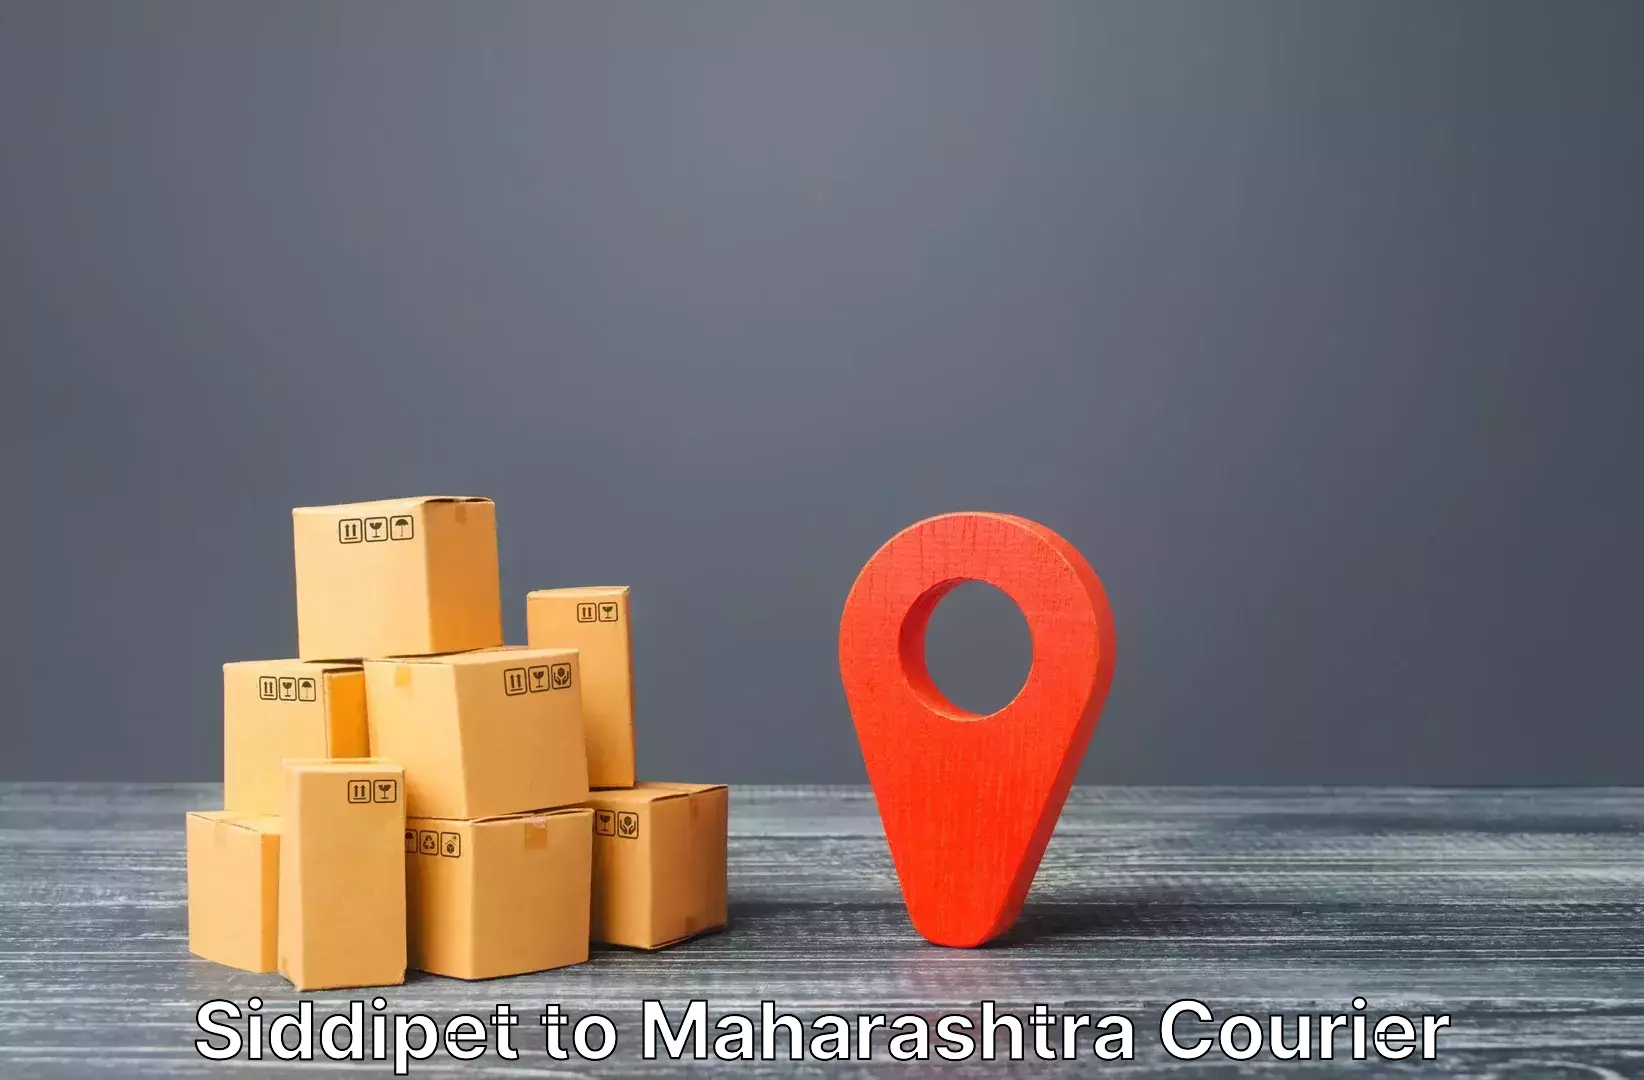 Luggage transport consulting Siddipet to Oras